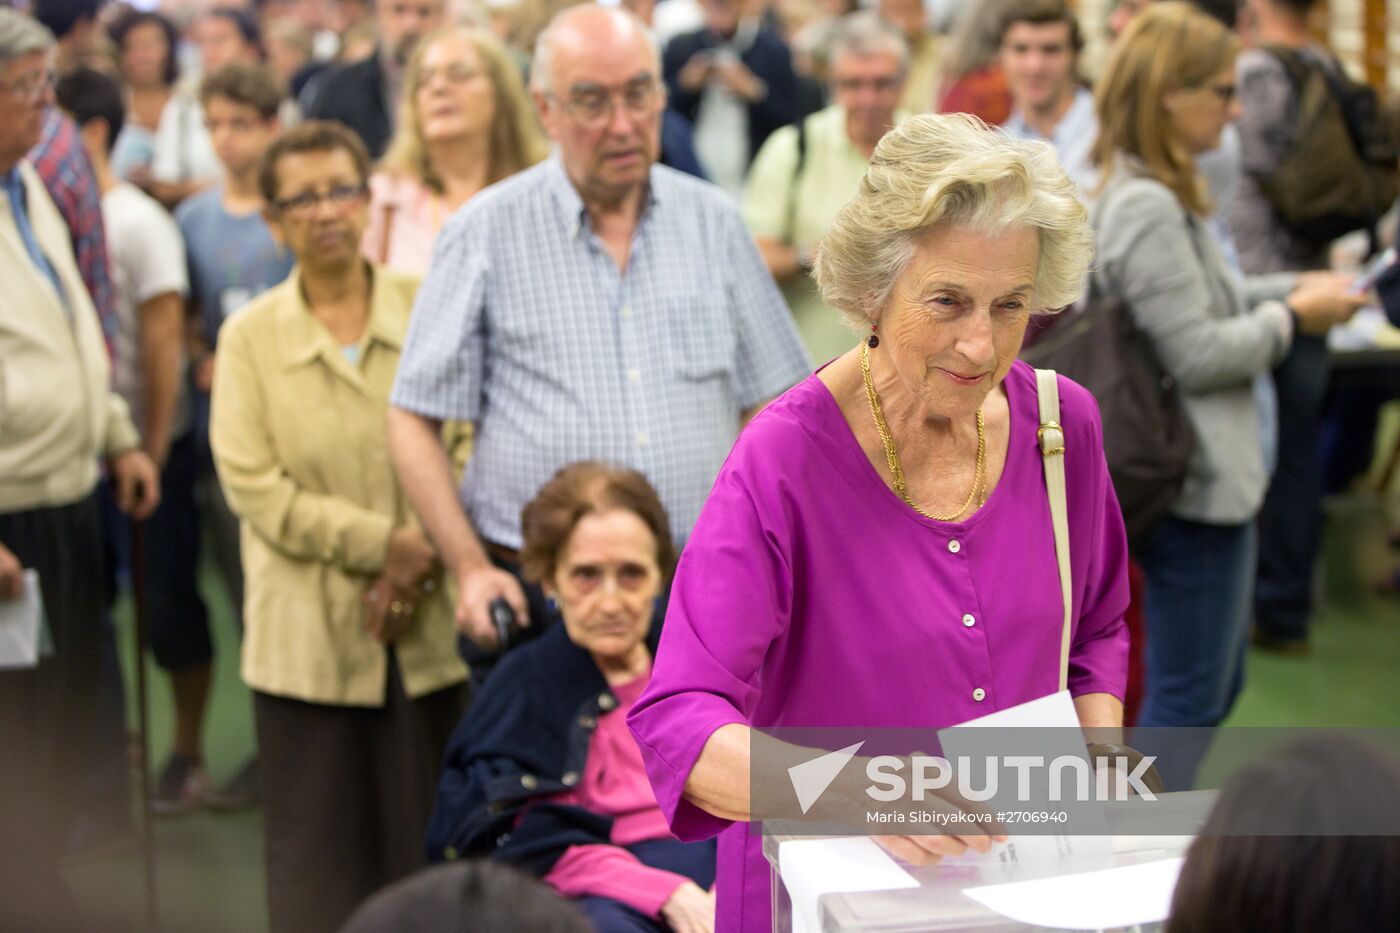 Early elections in Catalonia